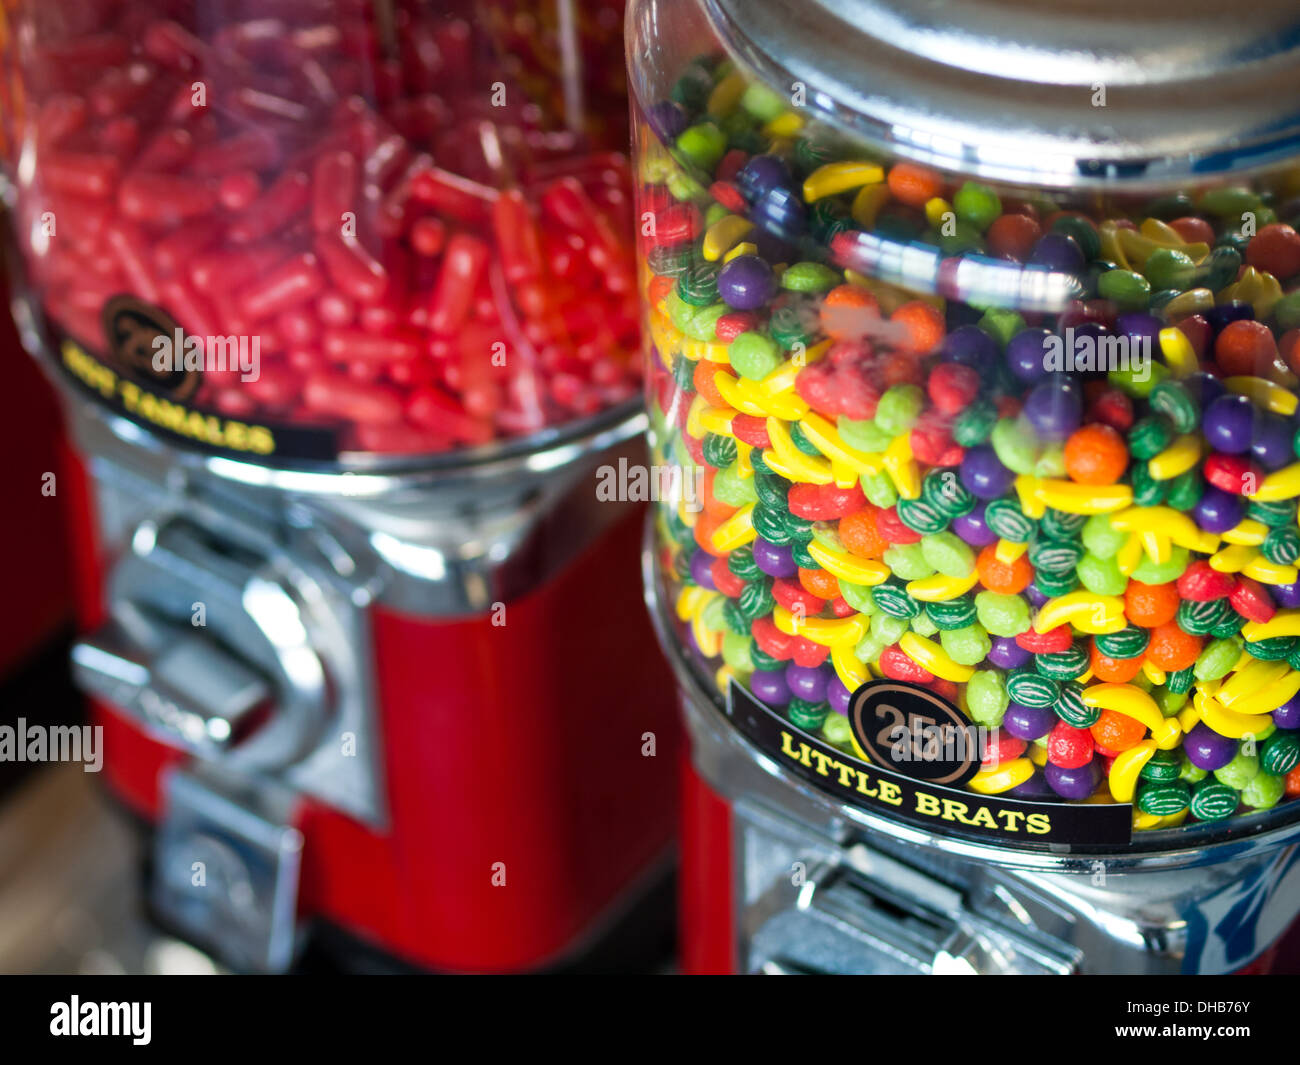 Little Brats and Hot Tamales candy in candy machines. Stock Photo